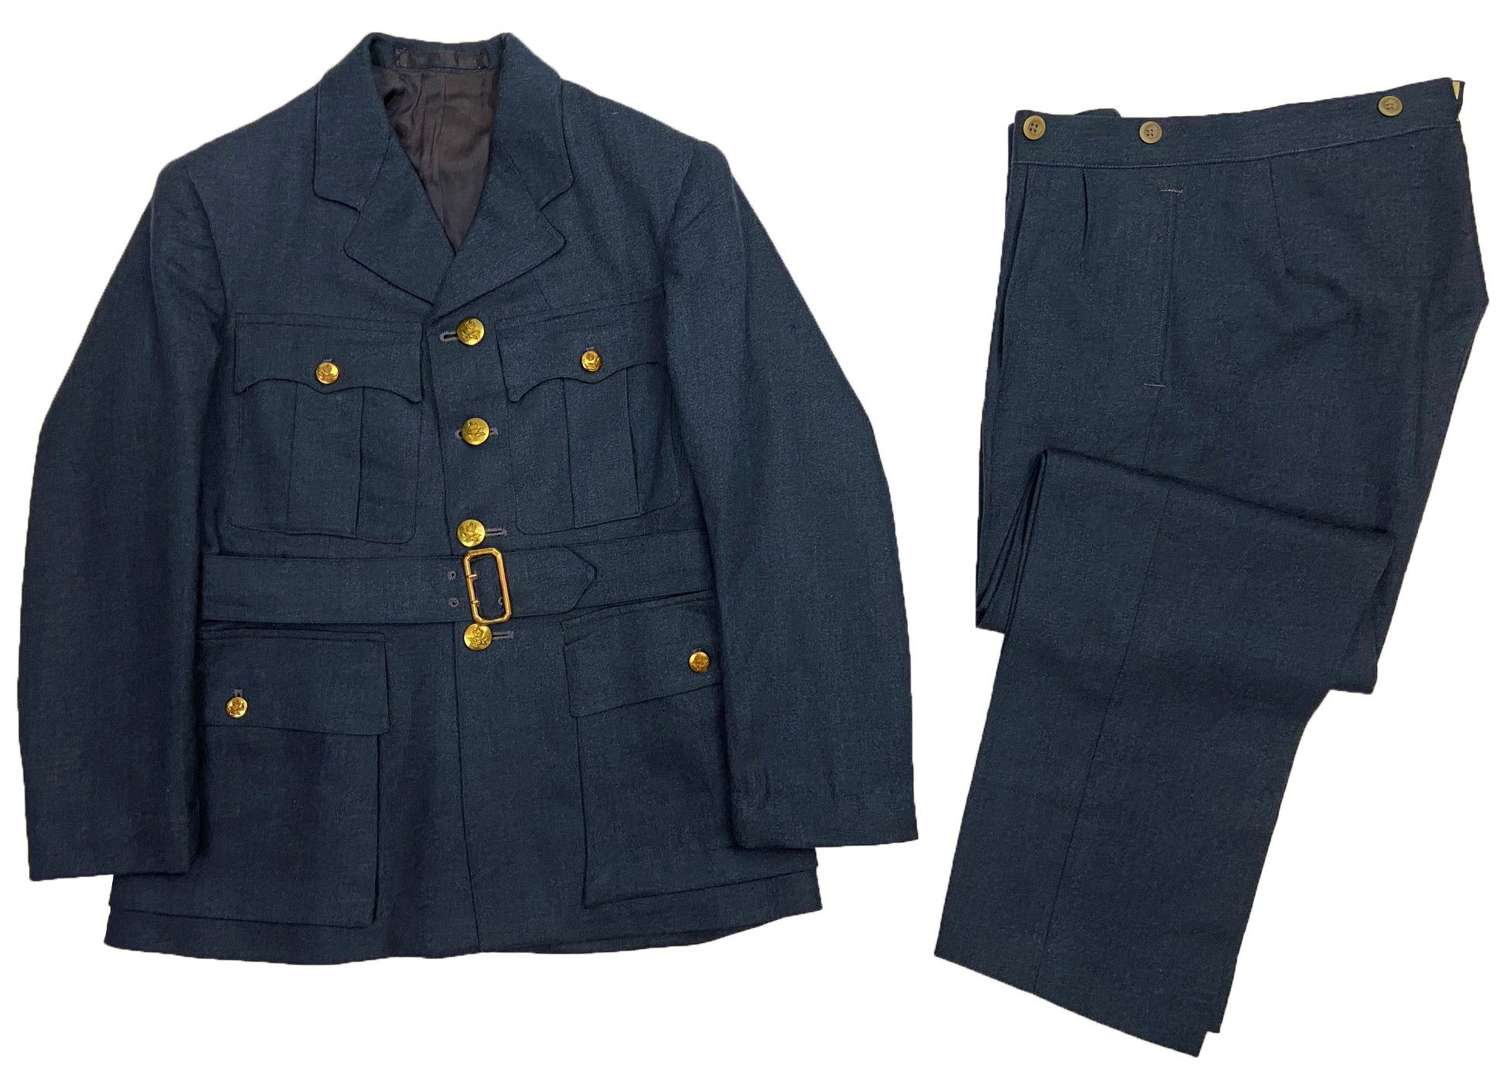 Original 1940s RAF Officers / Warrant Officers Tunic and Trousers